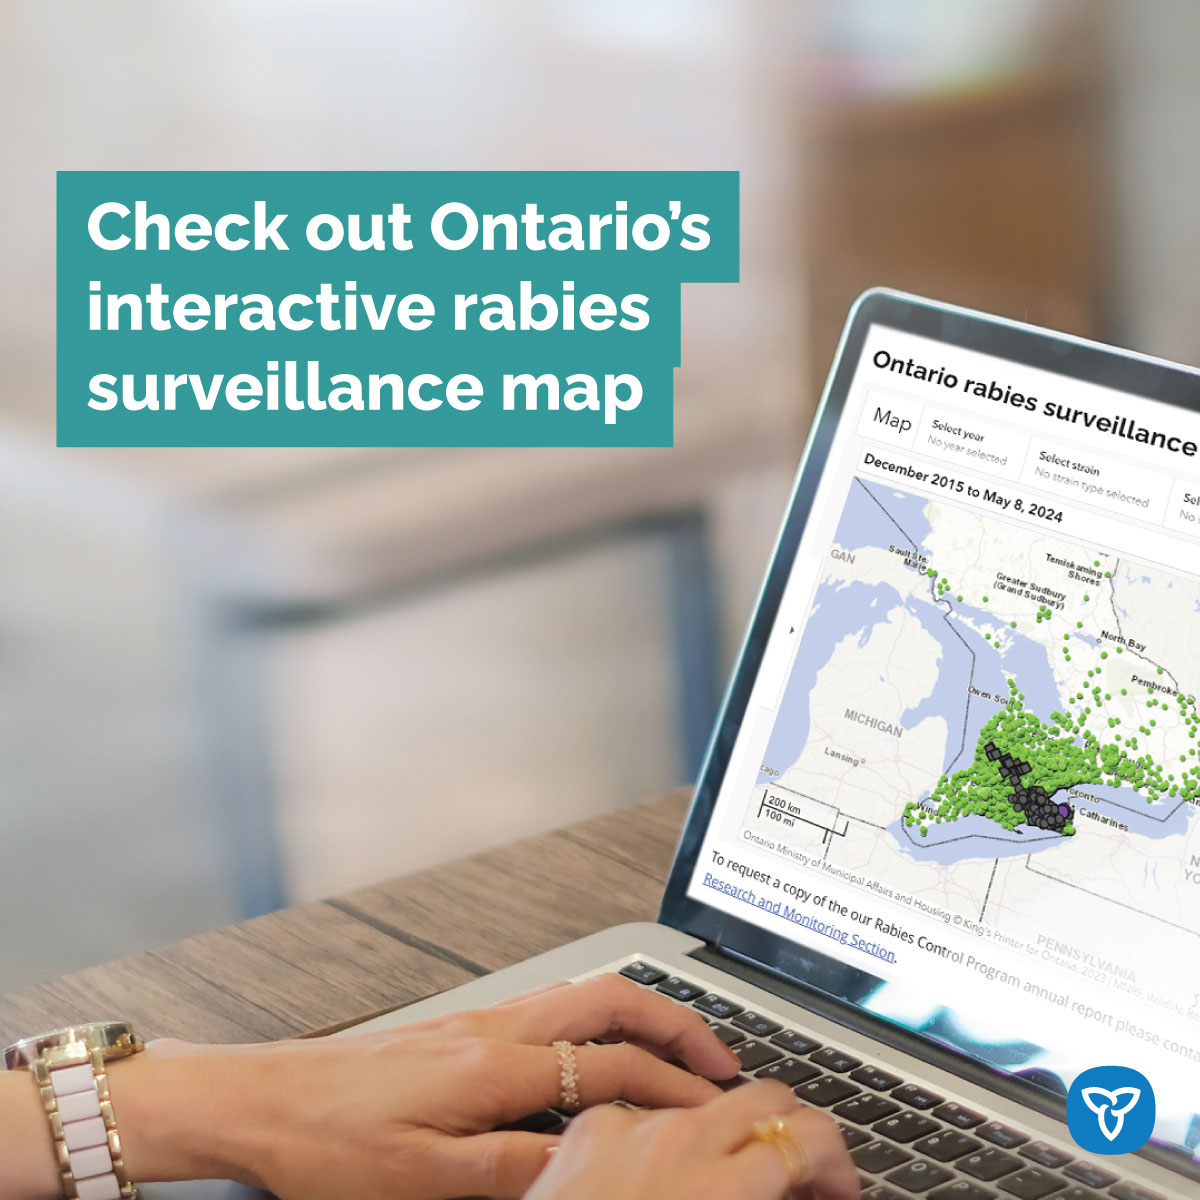 #DYK? You can view past and present terrestrial rabies cases on our interactive rabies surveillance map. Results can be filtered by year, rabies strain, status and municipality. View the map: ontario.ca/page/wildlife-… #RabiesAwarenessMonth